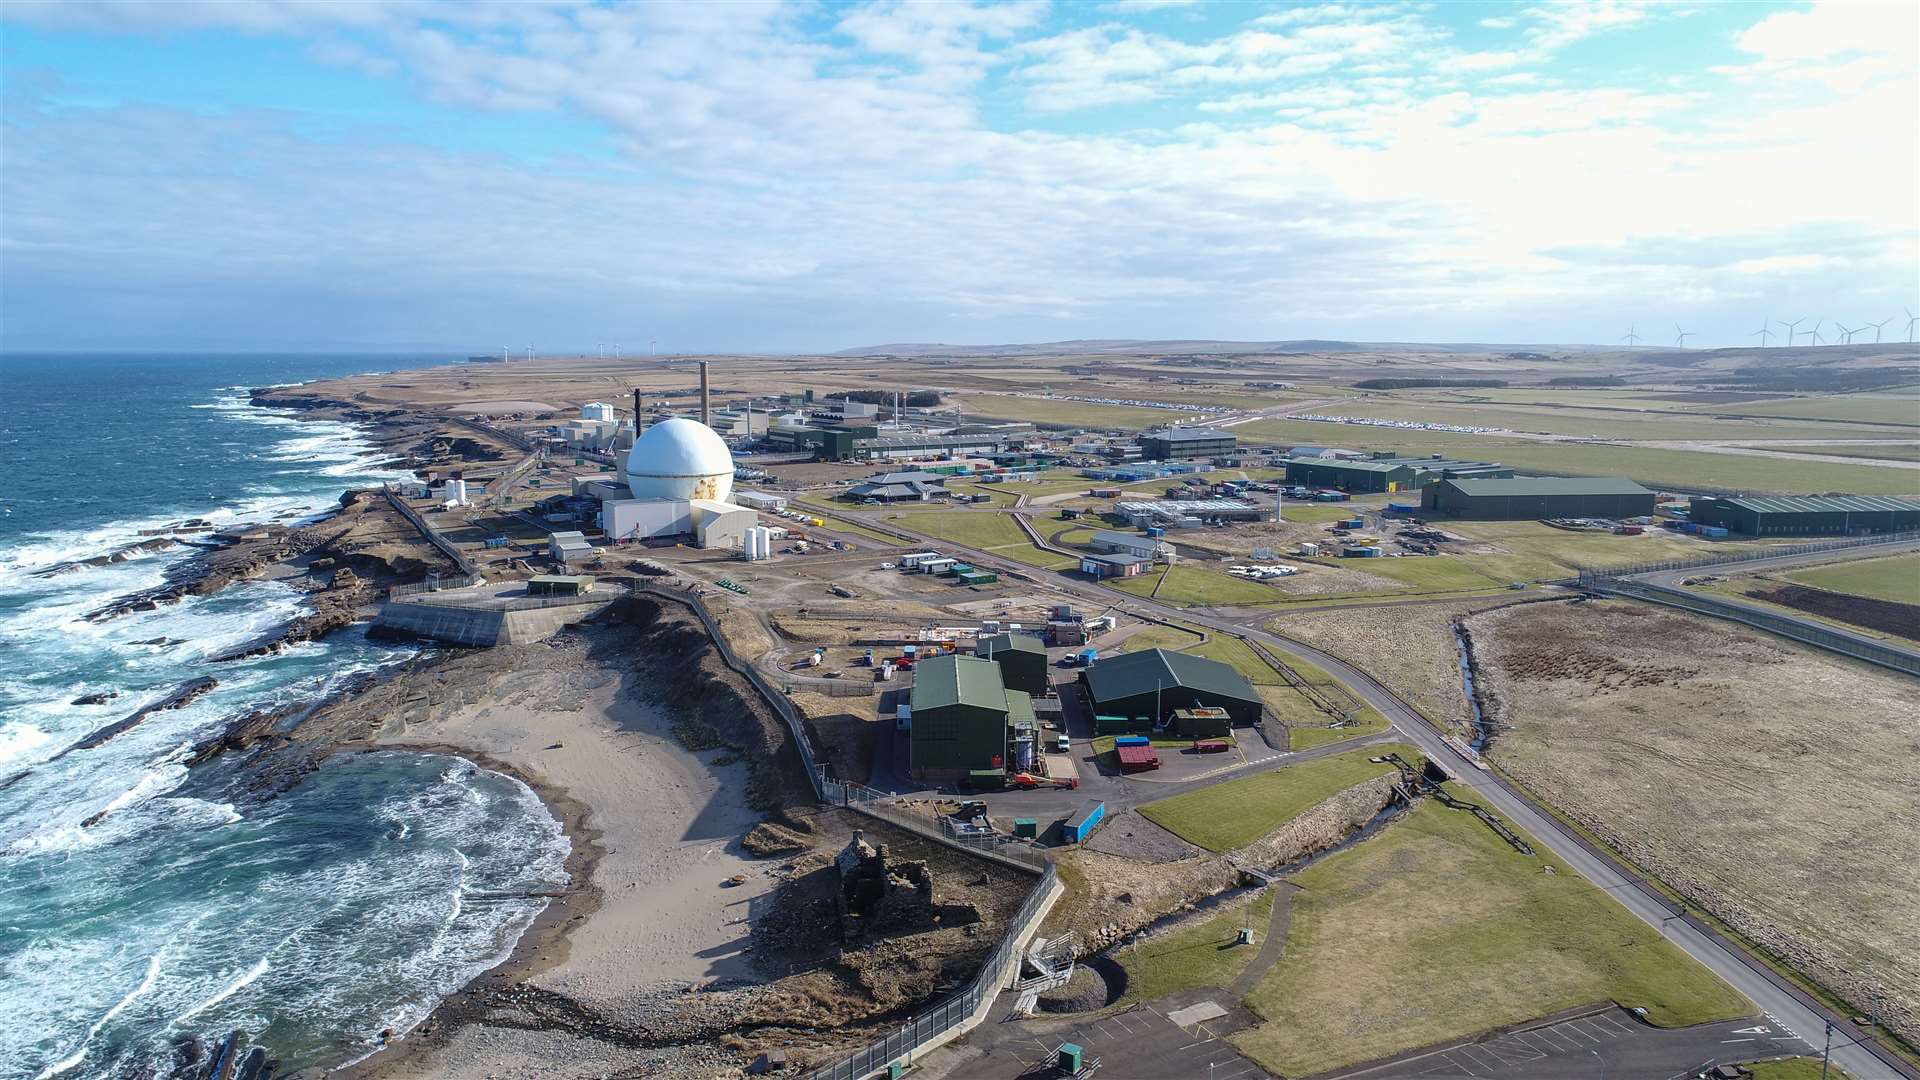 The Detailed Emergency Planning Zone (DEPZ) around Dounreay will be reduced to 630m.